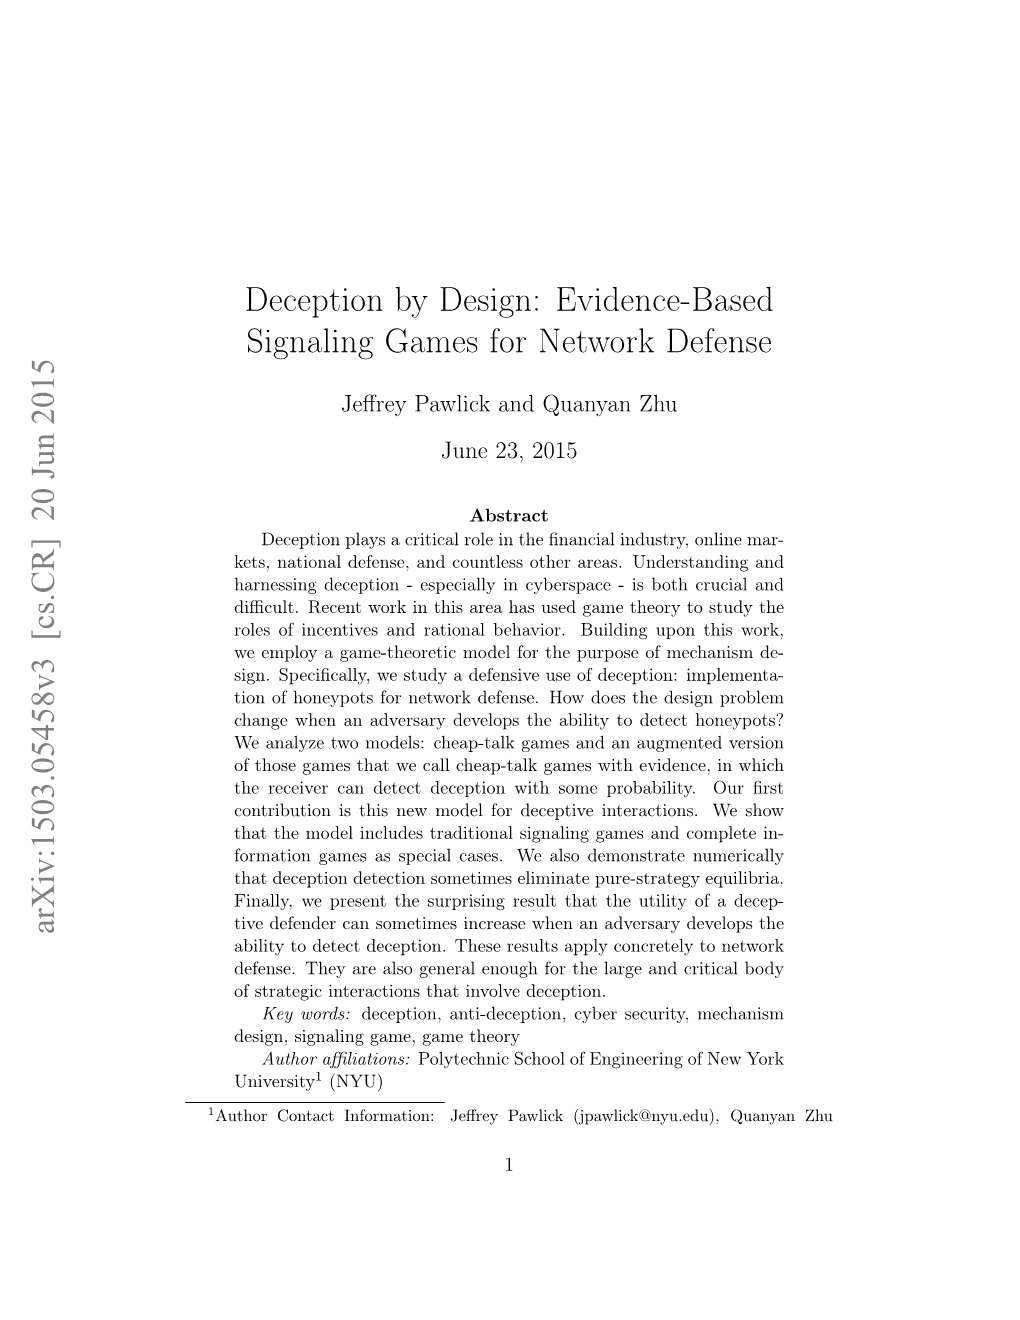 Evidence-Based Signaling Games for Network Defense